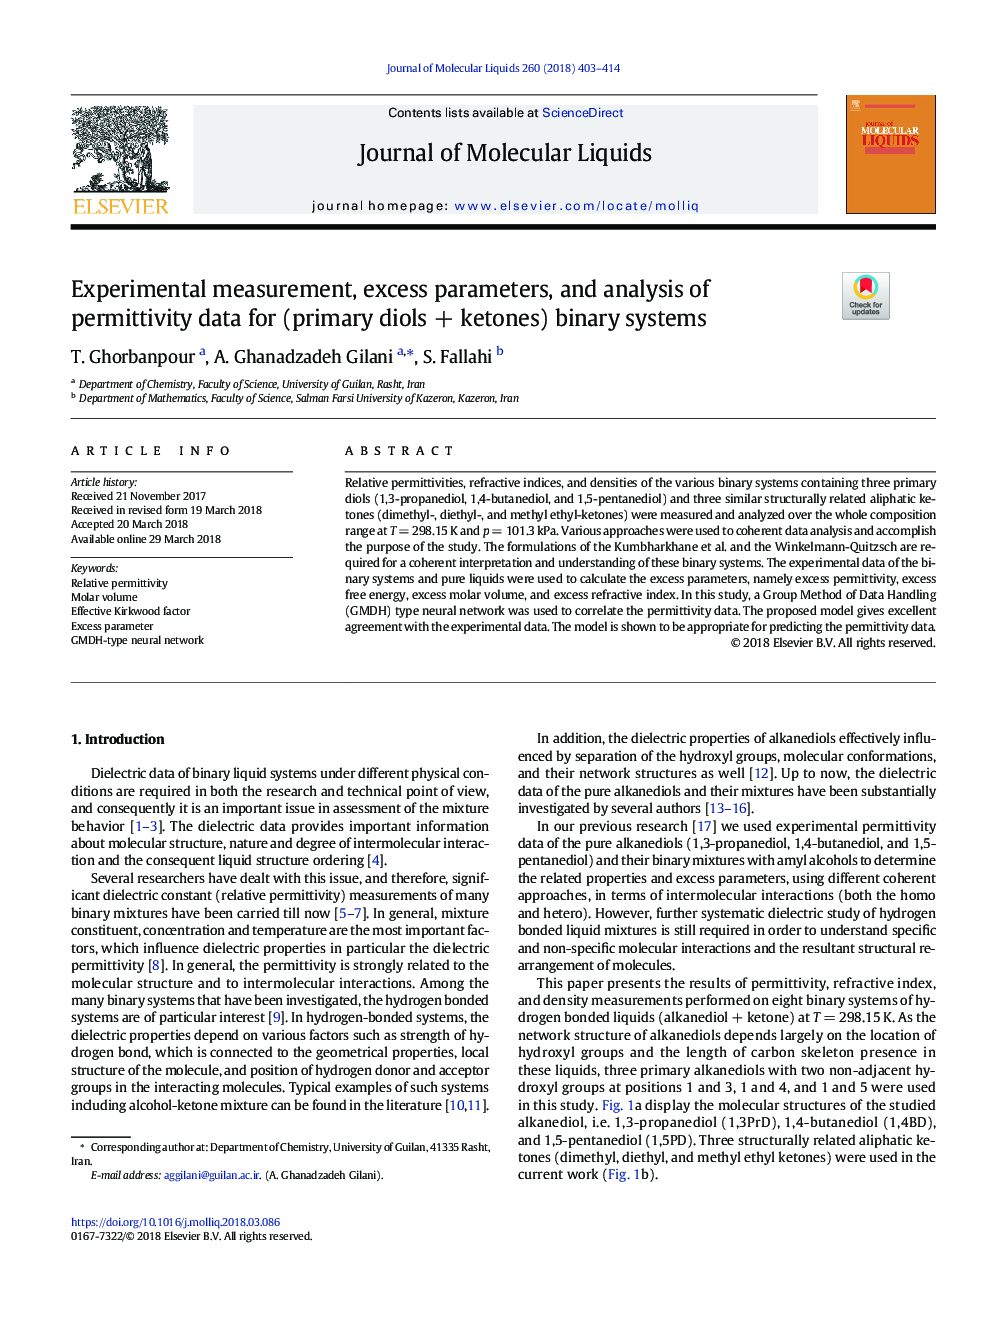 Experimental measurement, excess parameters, and analysis of permittivity data for (primary diolsÂ +Â ketones) binary systems